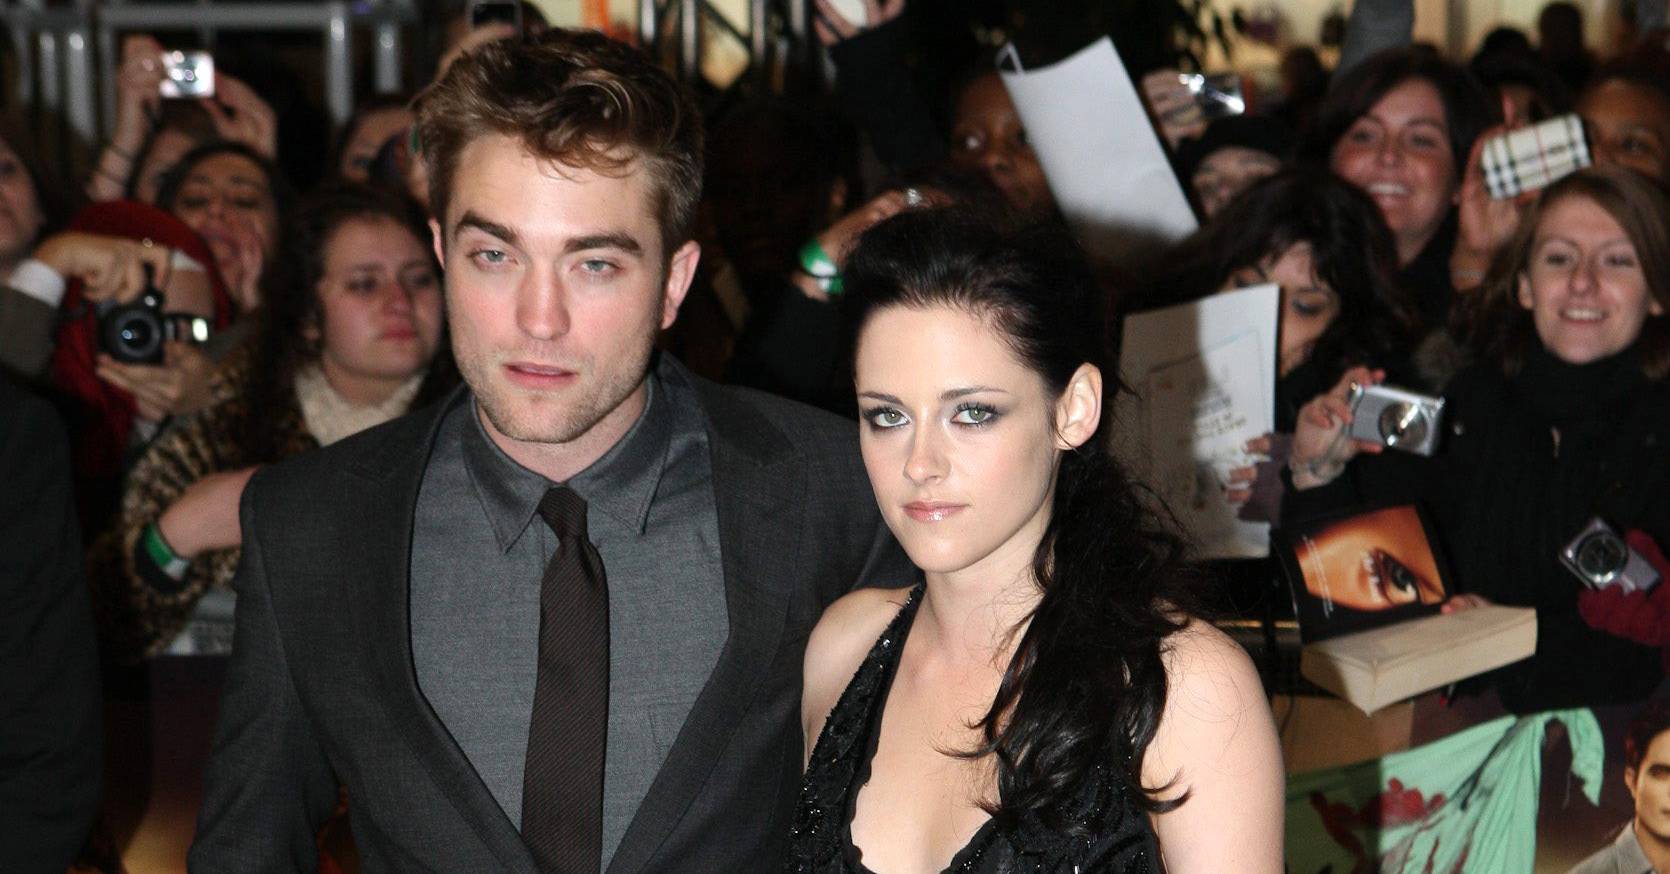 Kristen Stewart and Robert Pattinson are Back on Trial Basis | The Blemish